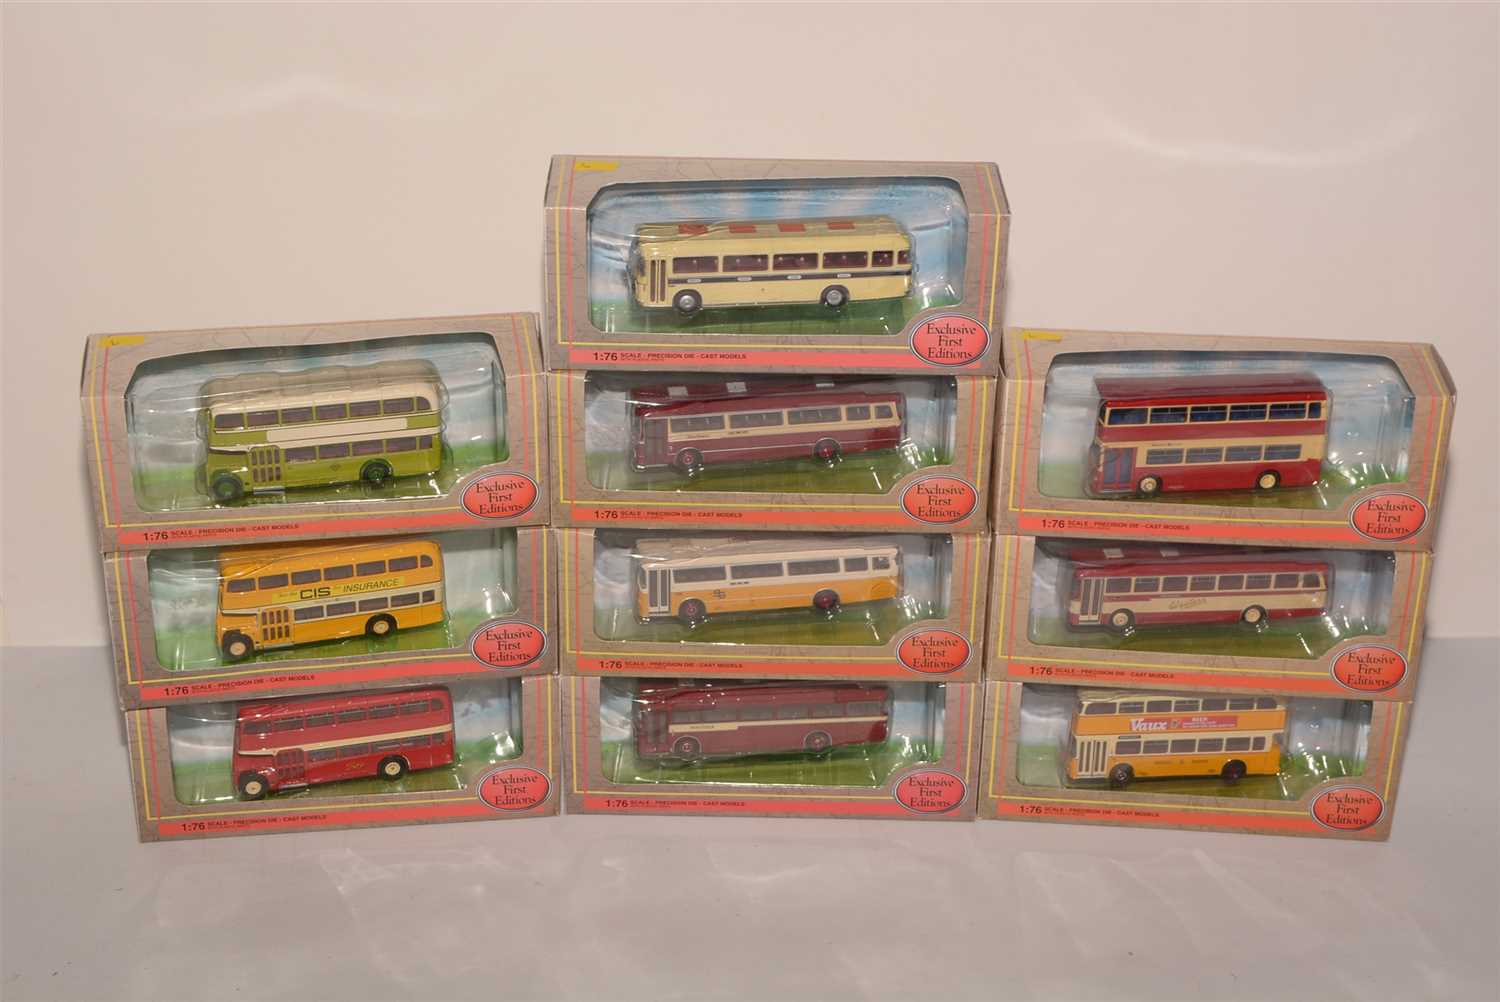 Lot 1340 - Die-cast model buses by Exclusive First Editions.